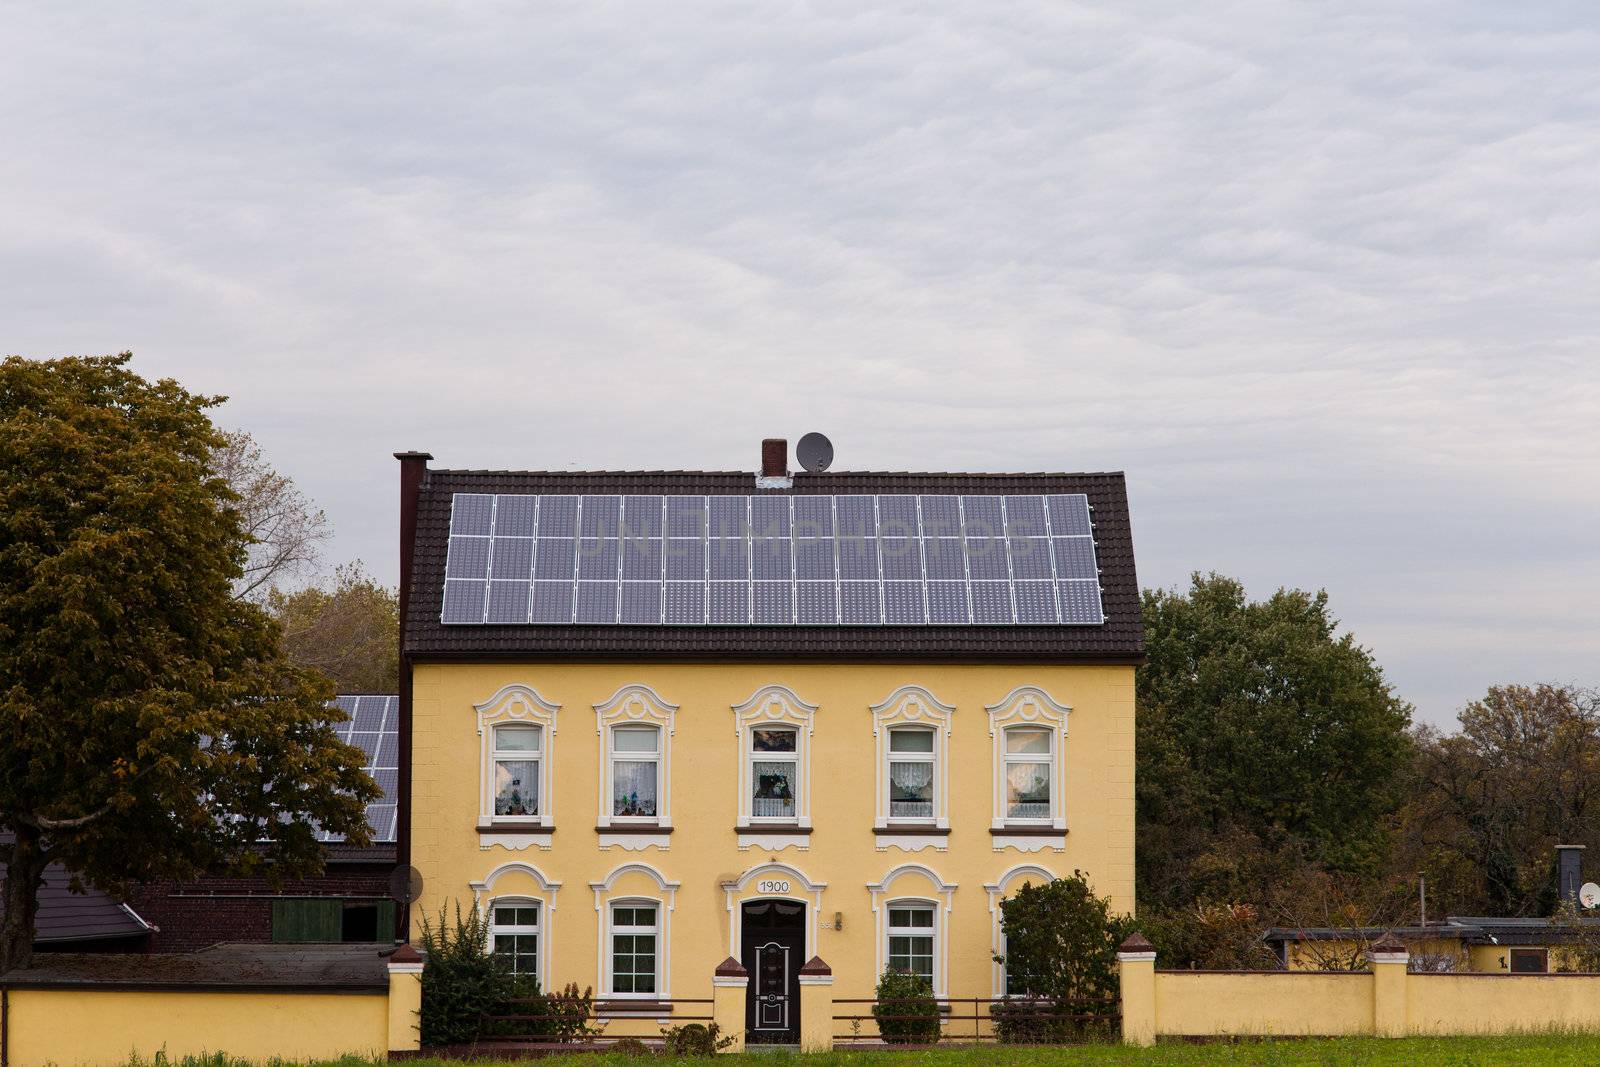 Historic house built 1900 has roof covered with modern solar panels for generating green power.